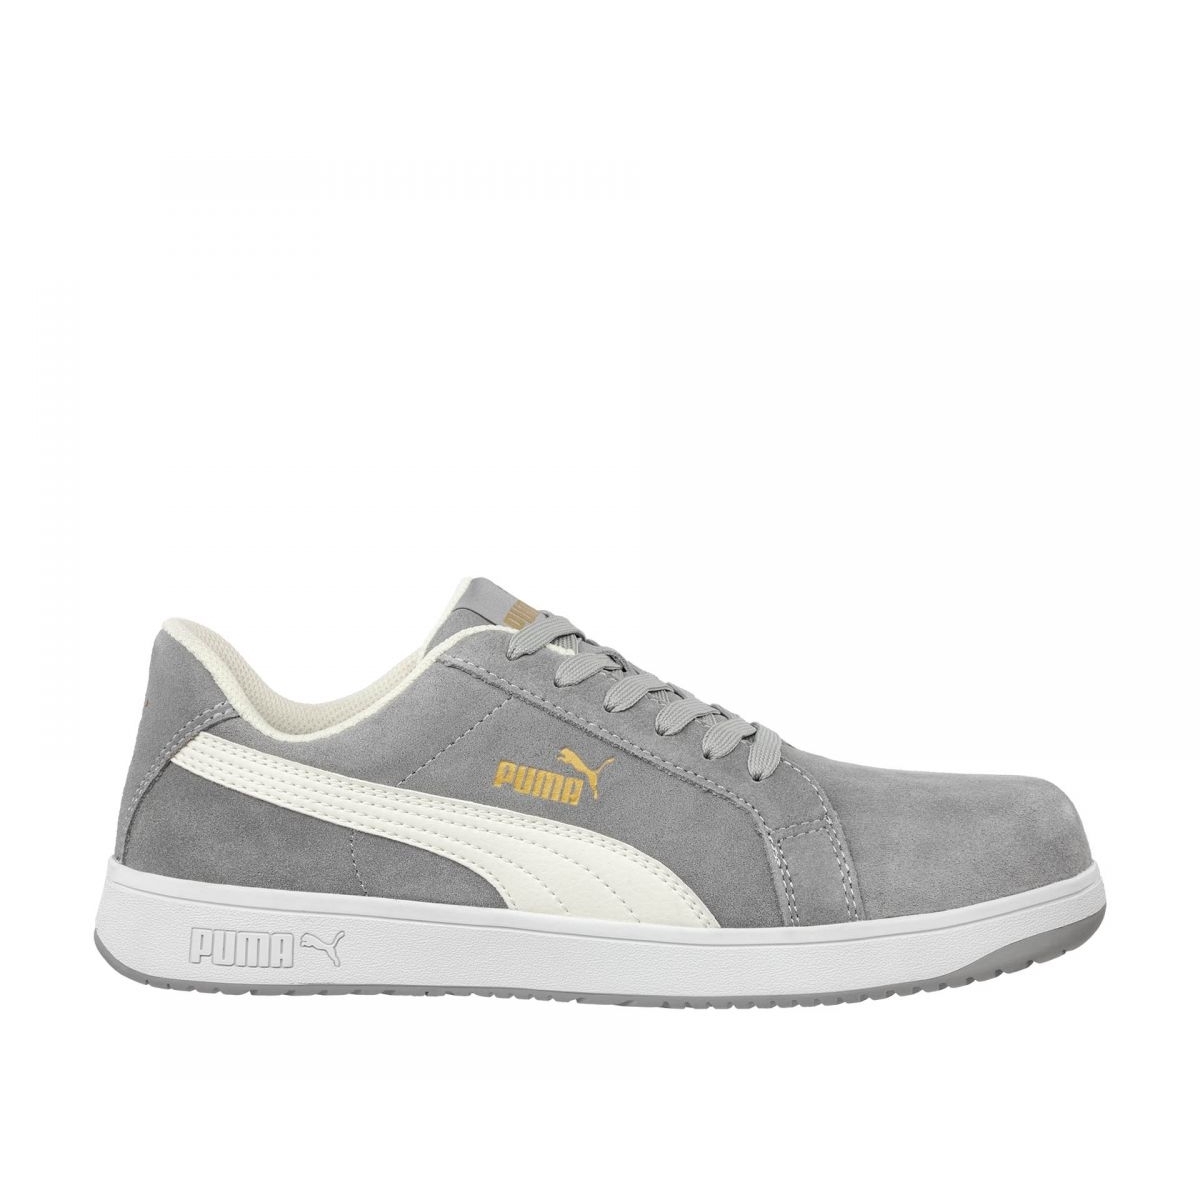 PUMA Safety Men's Iconic Low Composite Toe SD Work Shoes Grey Suede - 640035 Grey - Grey, 12